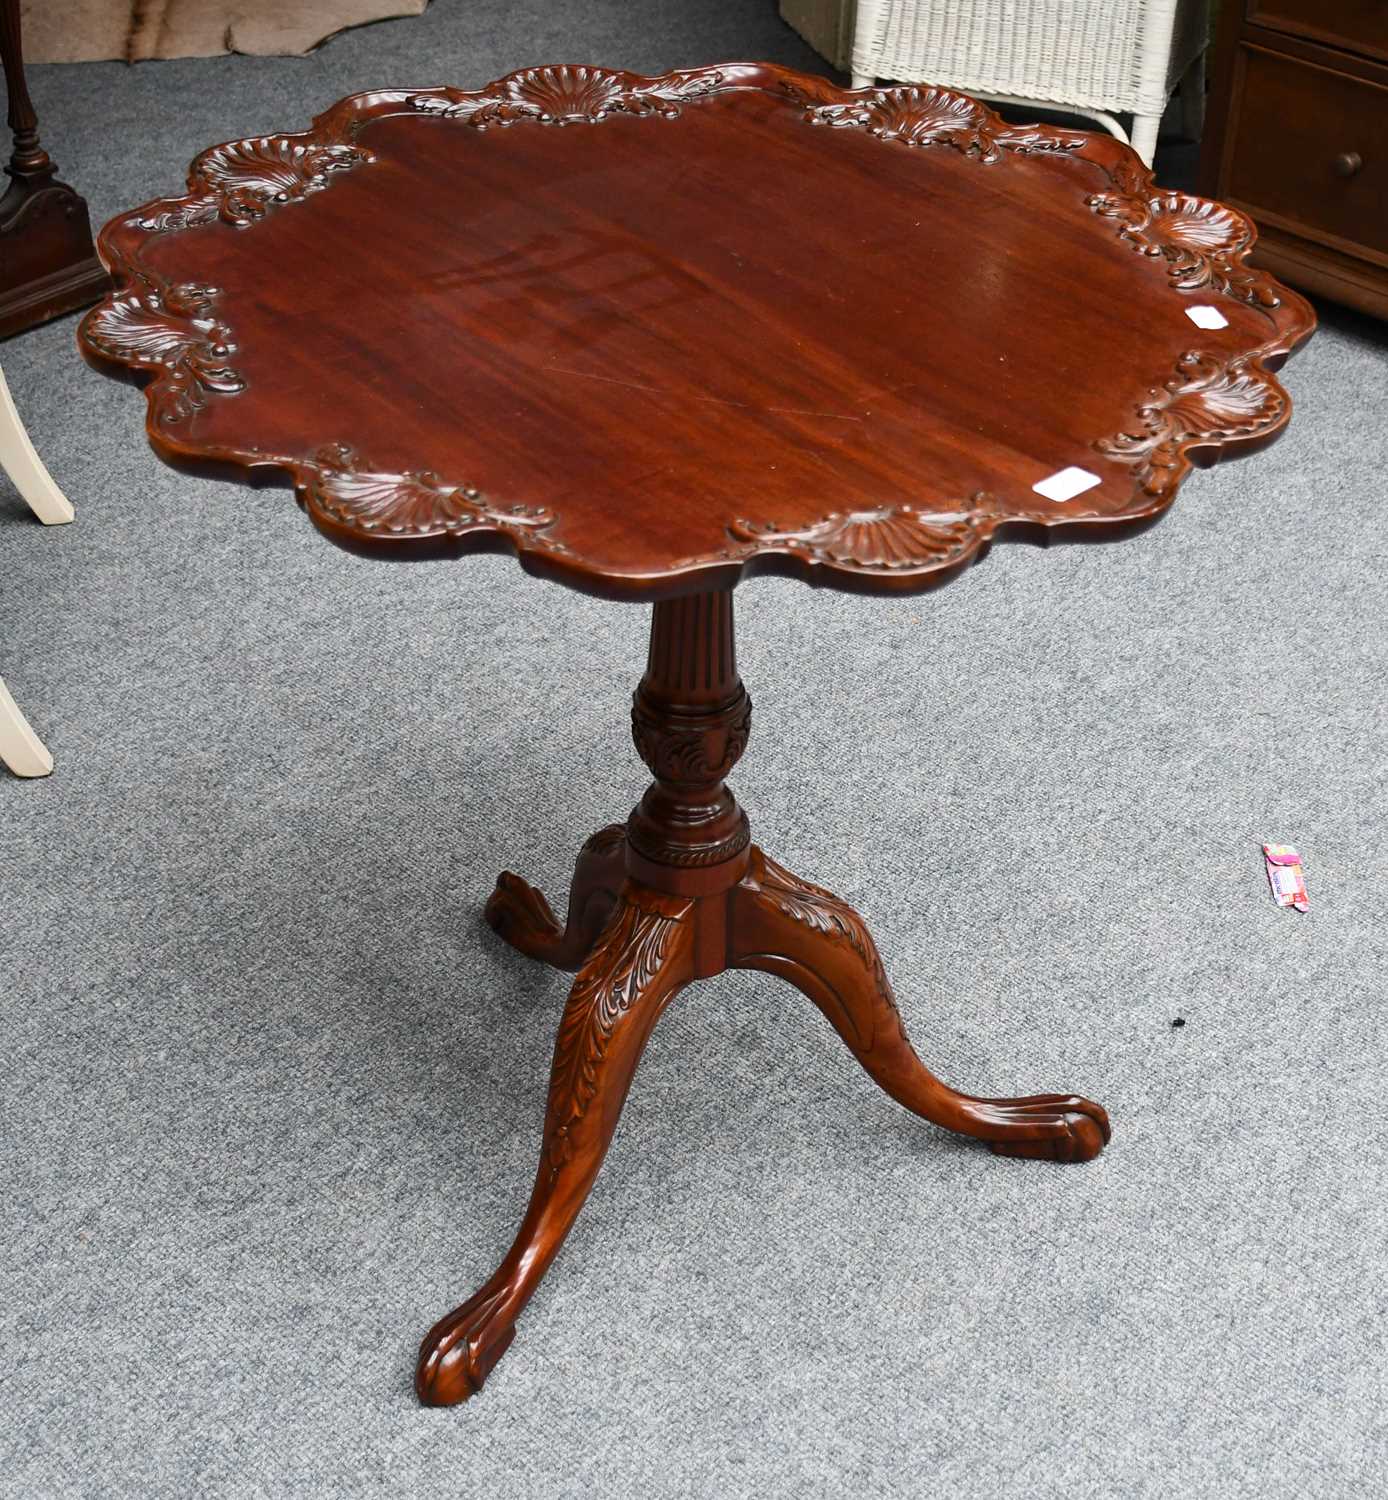 A reproduction George III style mahogany supper table with scalloped dish top carved with shells and